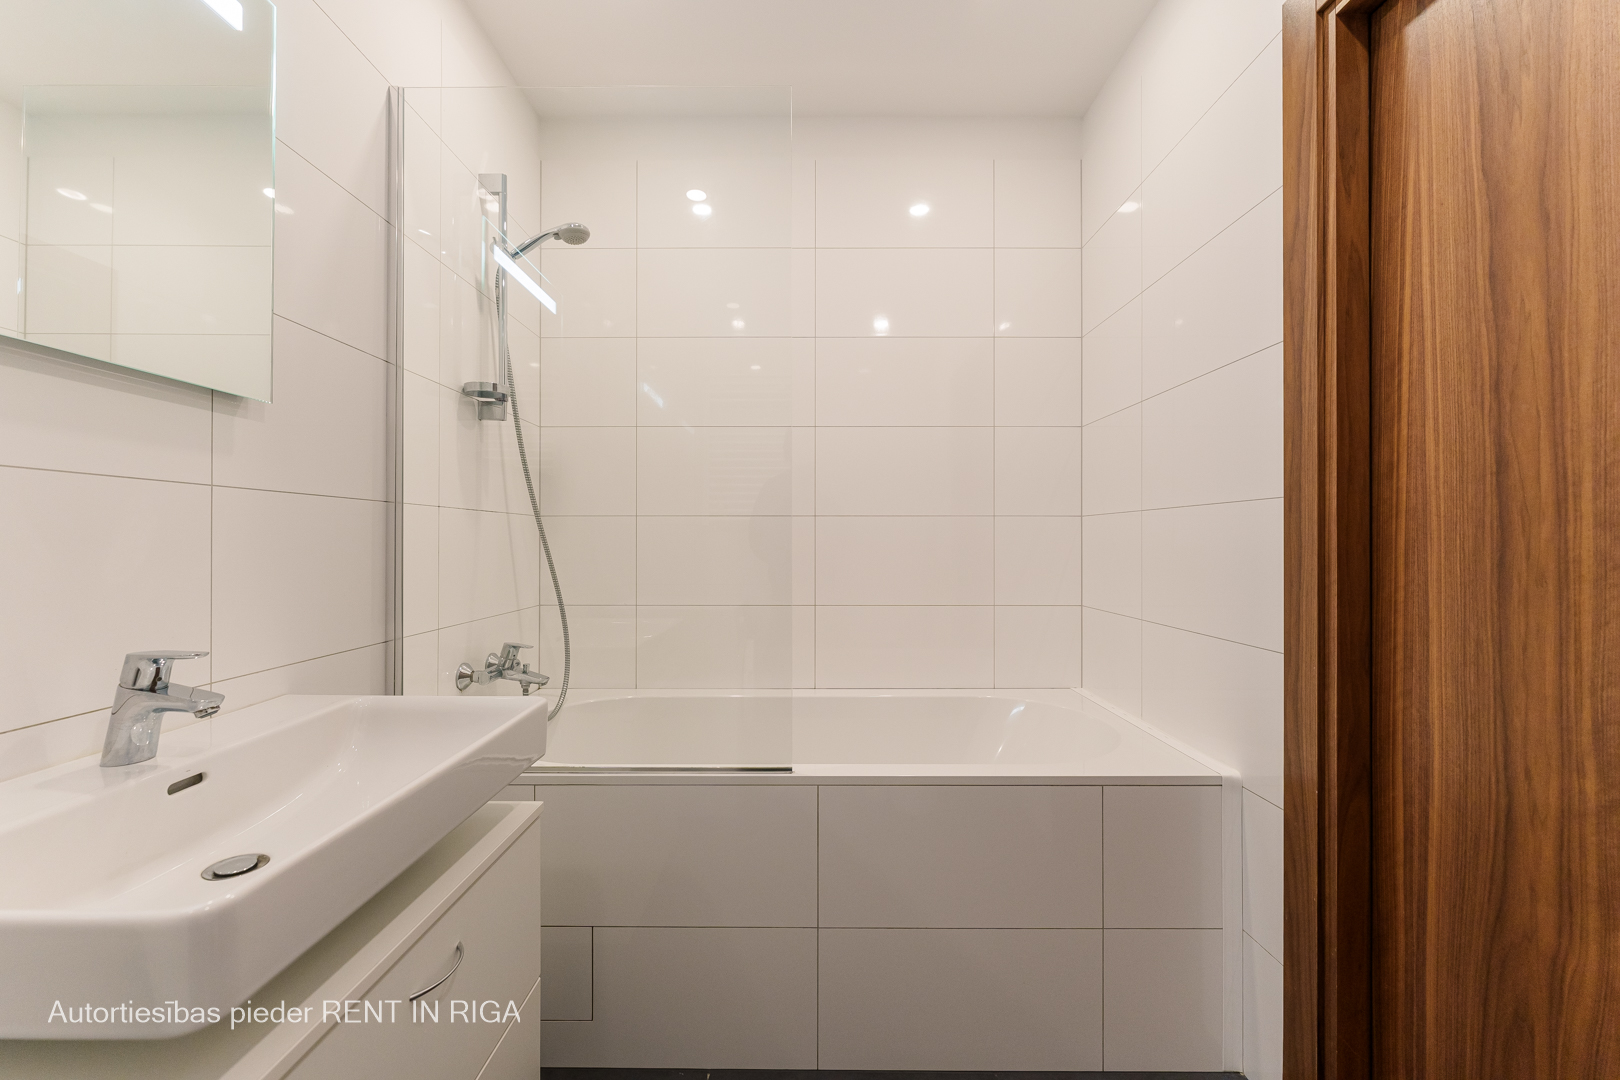 Apartment for rent, Valkas street 4 - Image 1